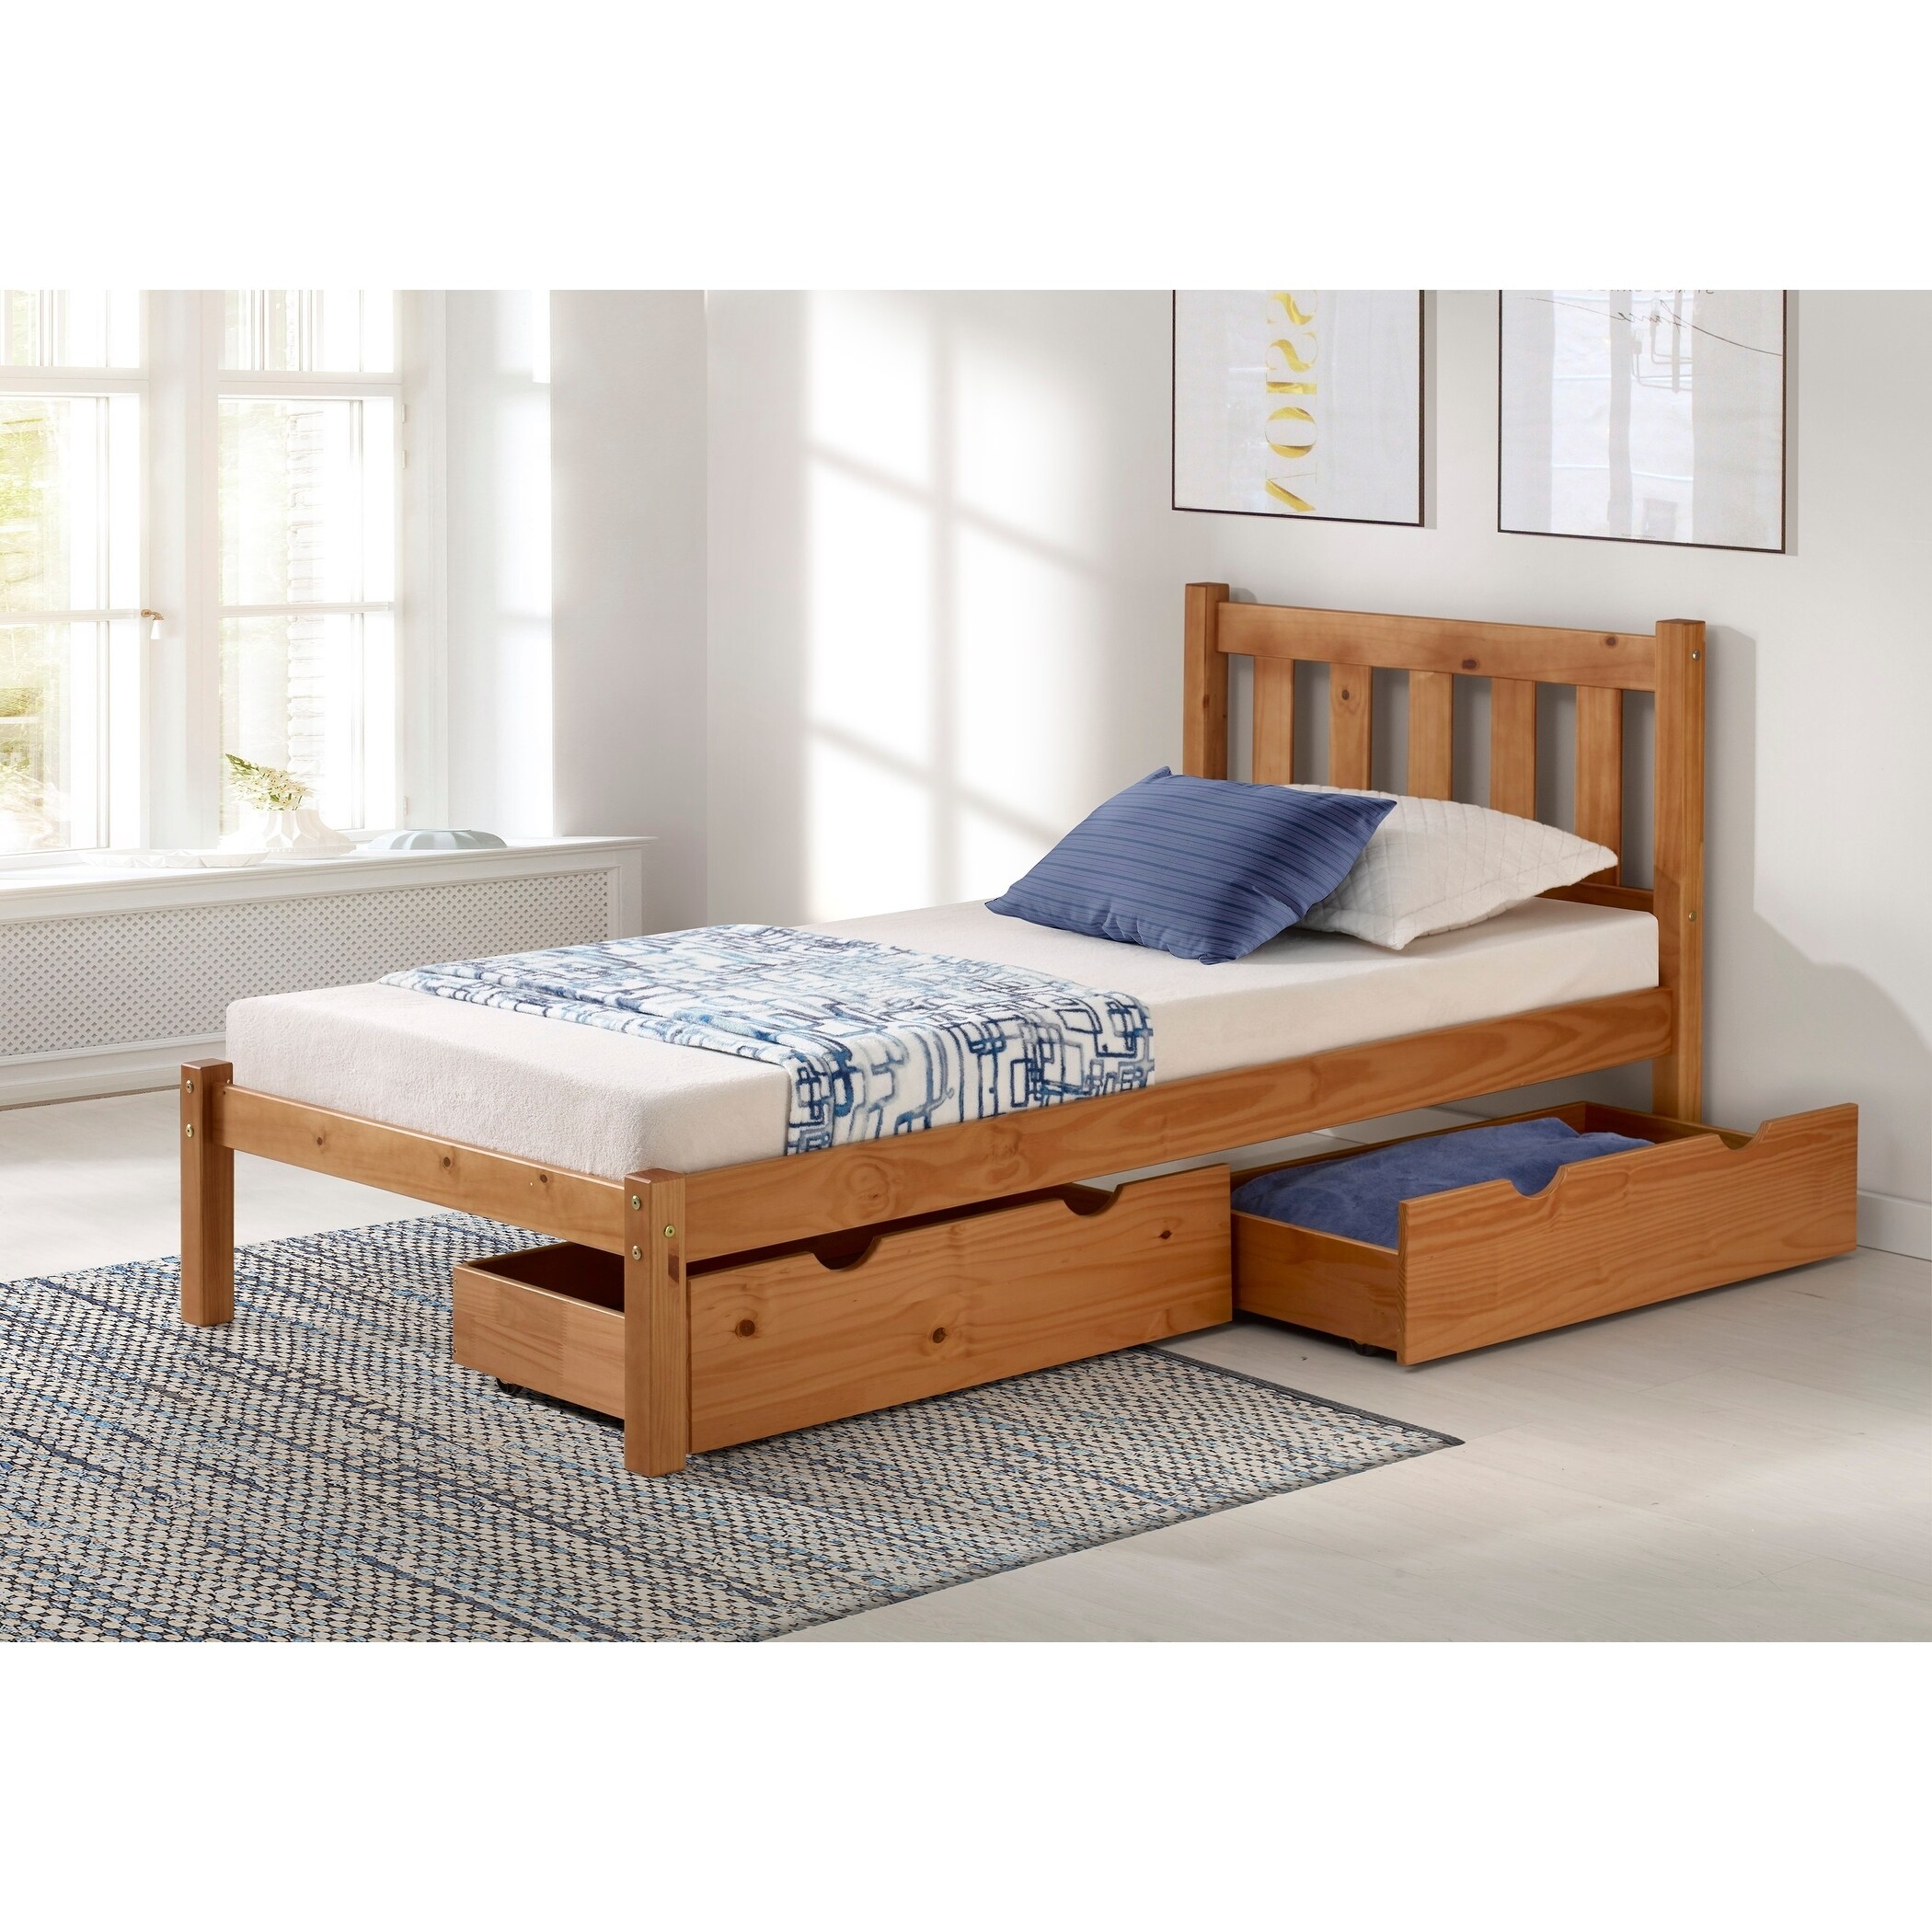 Shop Poppy Solid Wood Twin Or Full Size Bed On Sale Overstock